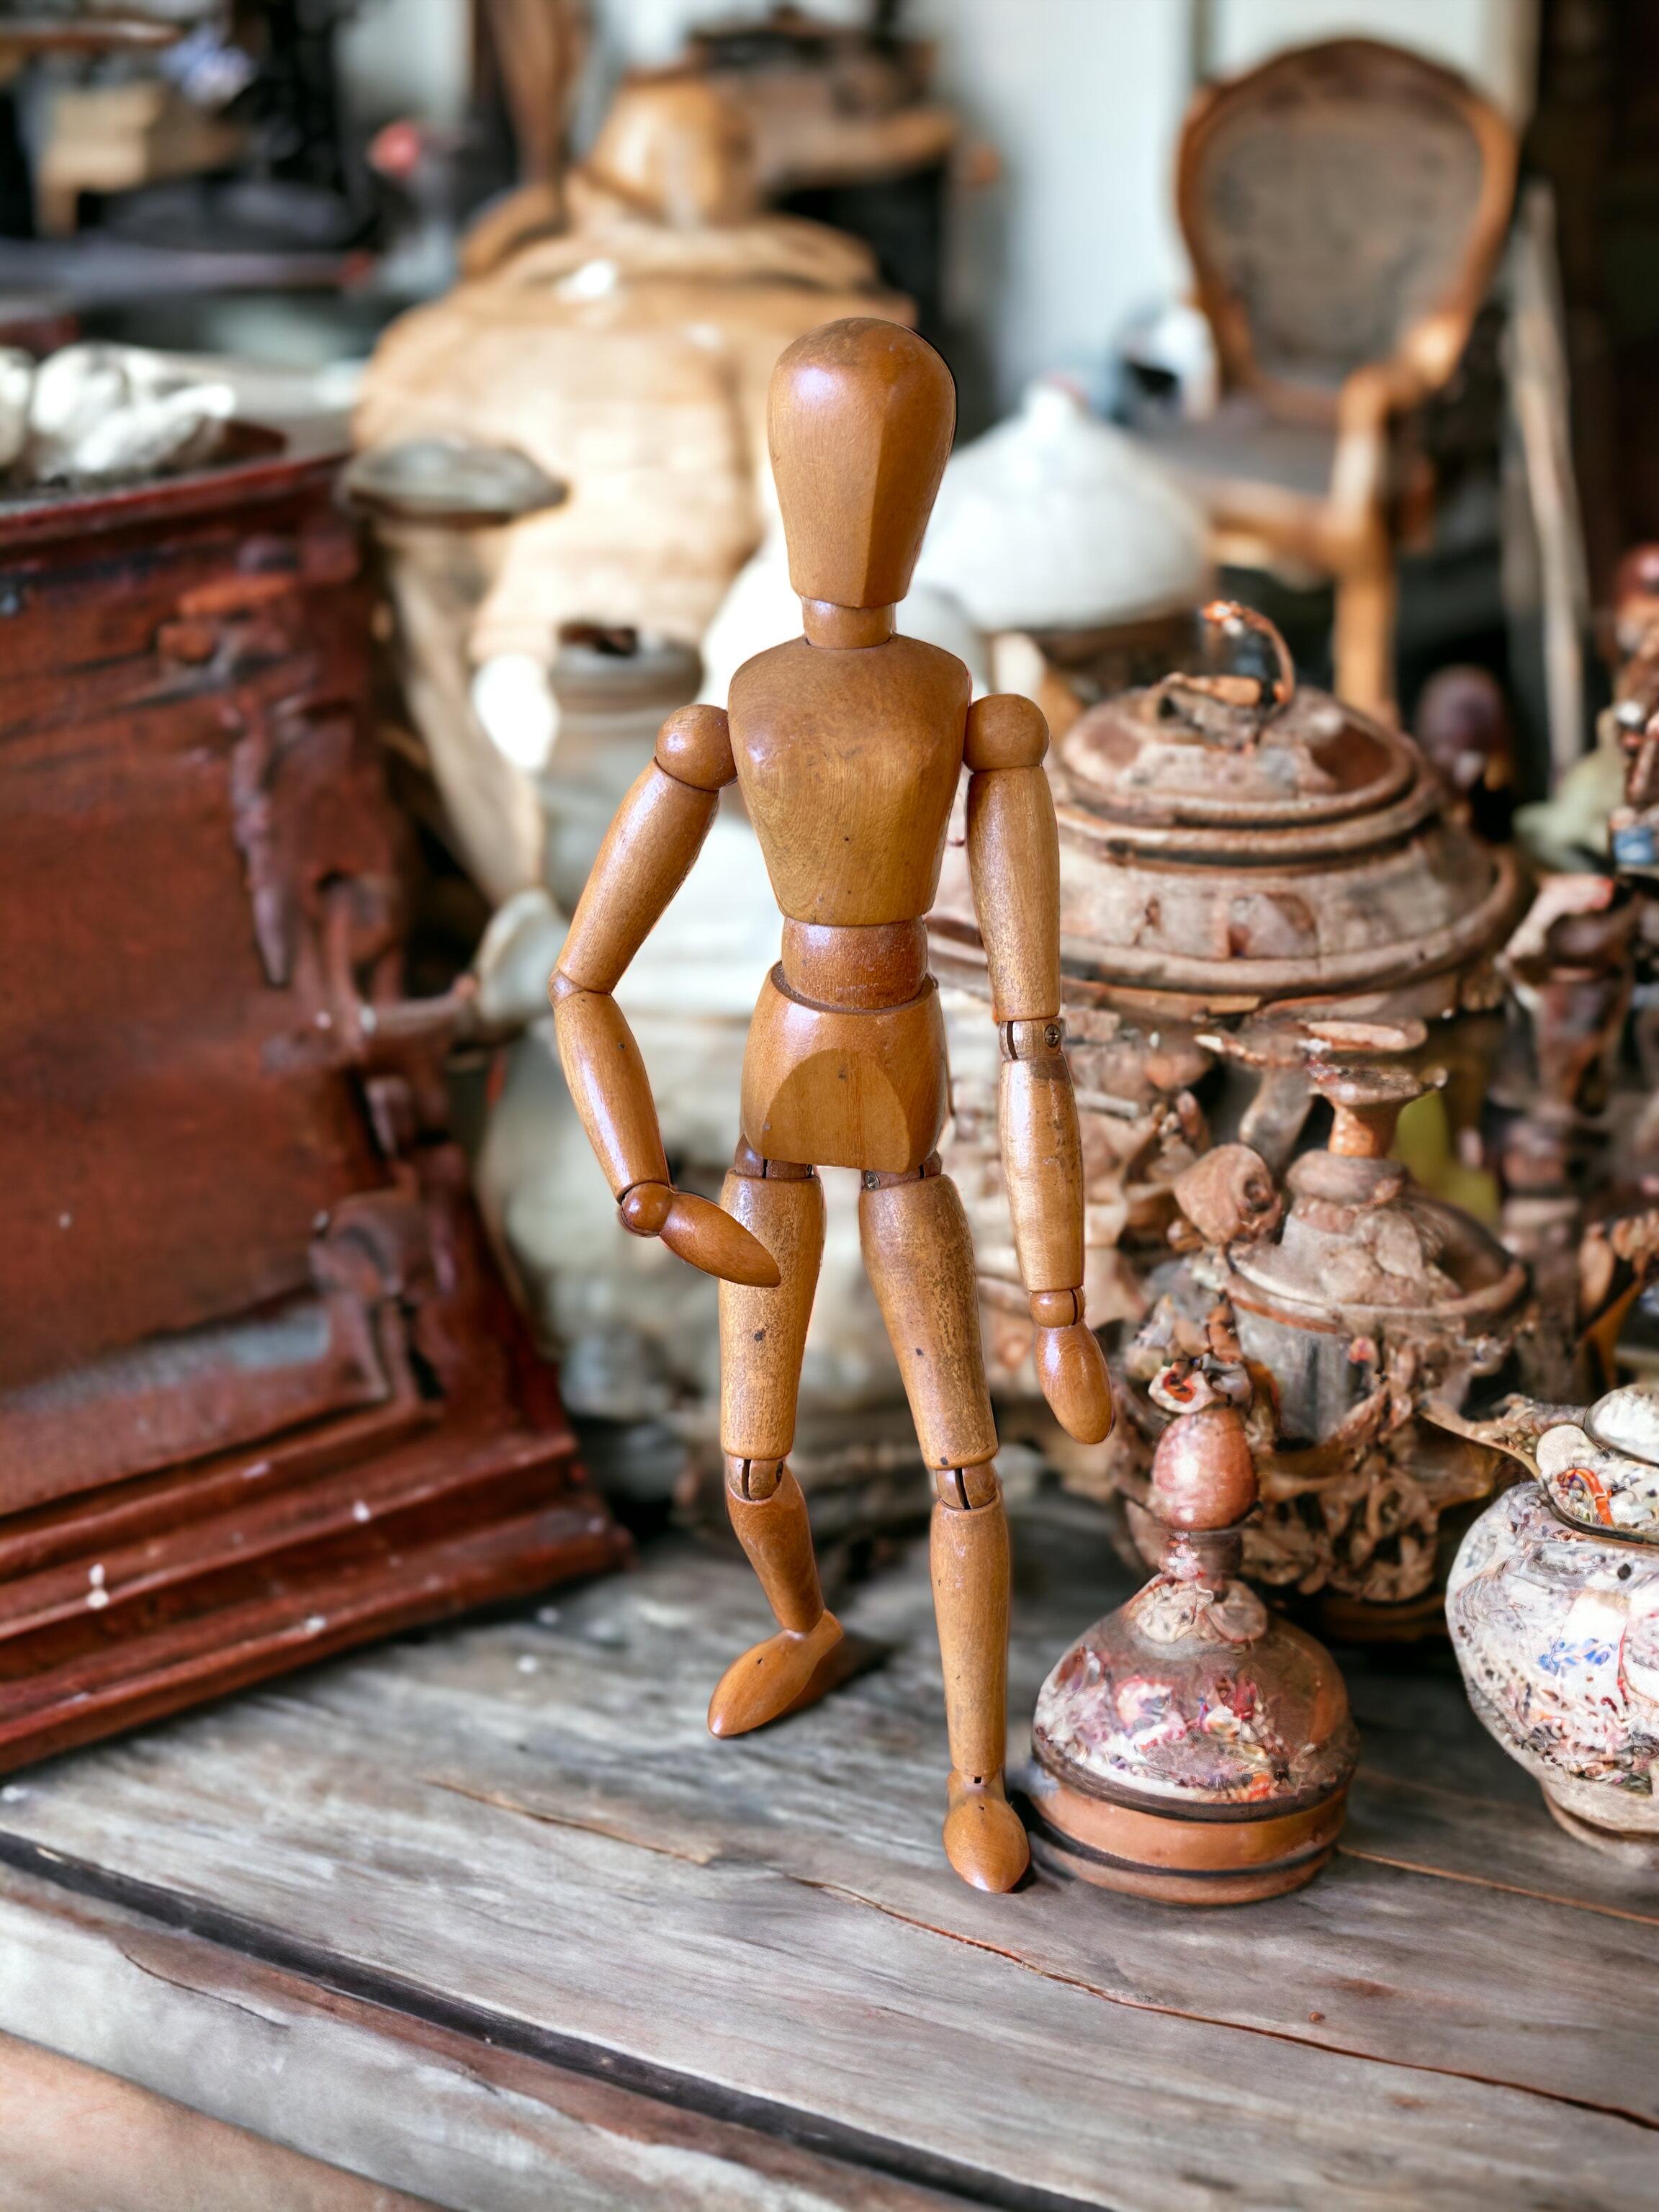 A handmade wooden Artist mannequin model - all joints move as they should. Found on a Estate sale in Verona, Italy.
Shows some wear - but looks beautiful on display! Some scratches and a nice patina due to the age. Makes a nice addition to any room. 